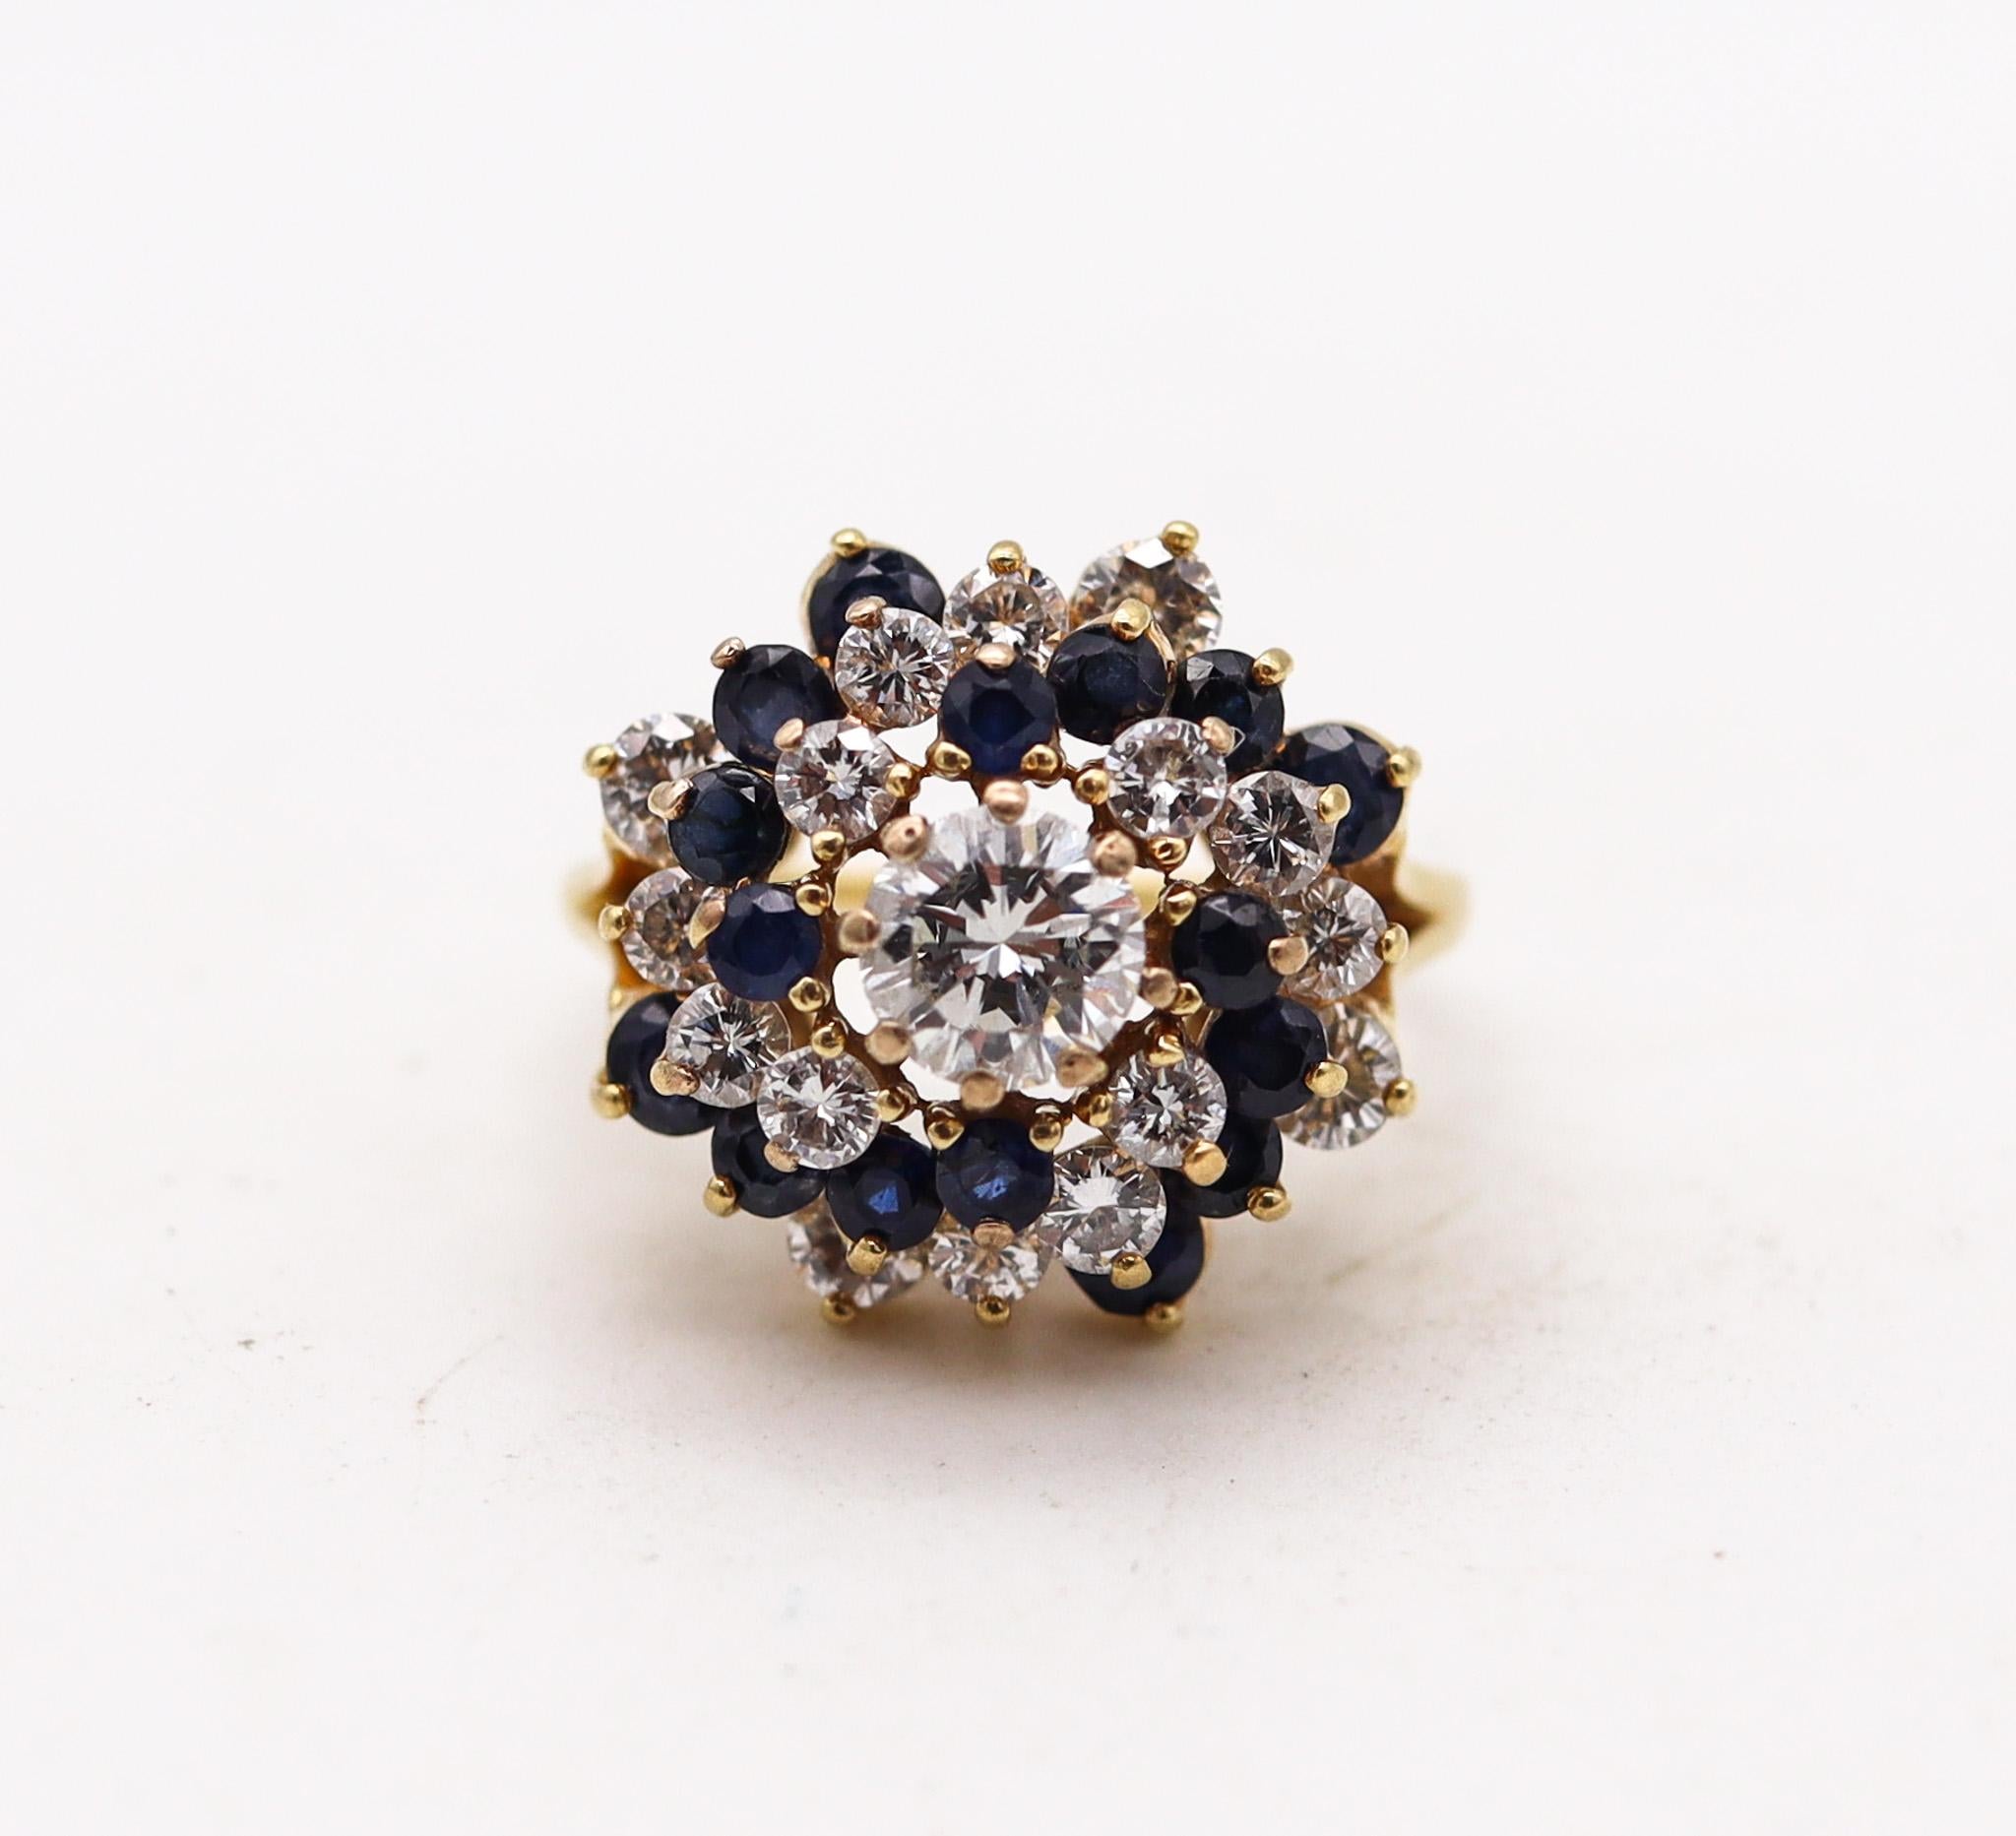 Modernist Tiffany & Co. Cluster Ring In 18Kt Gold With 2.58 Ctw In Diamonds And Sapphires